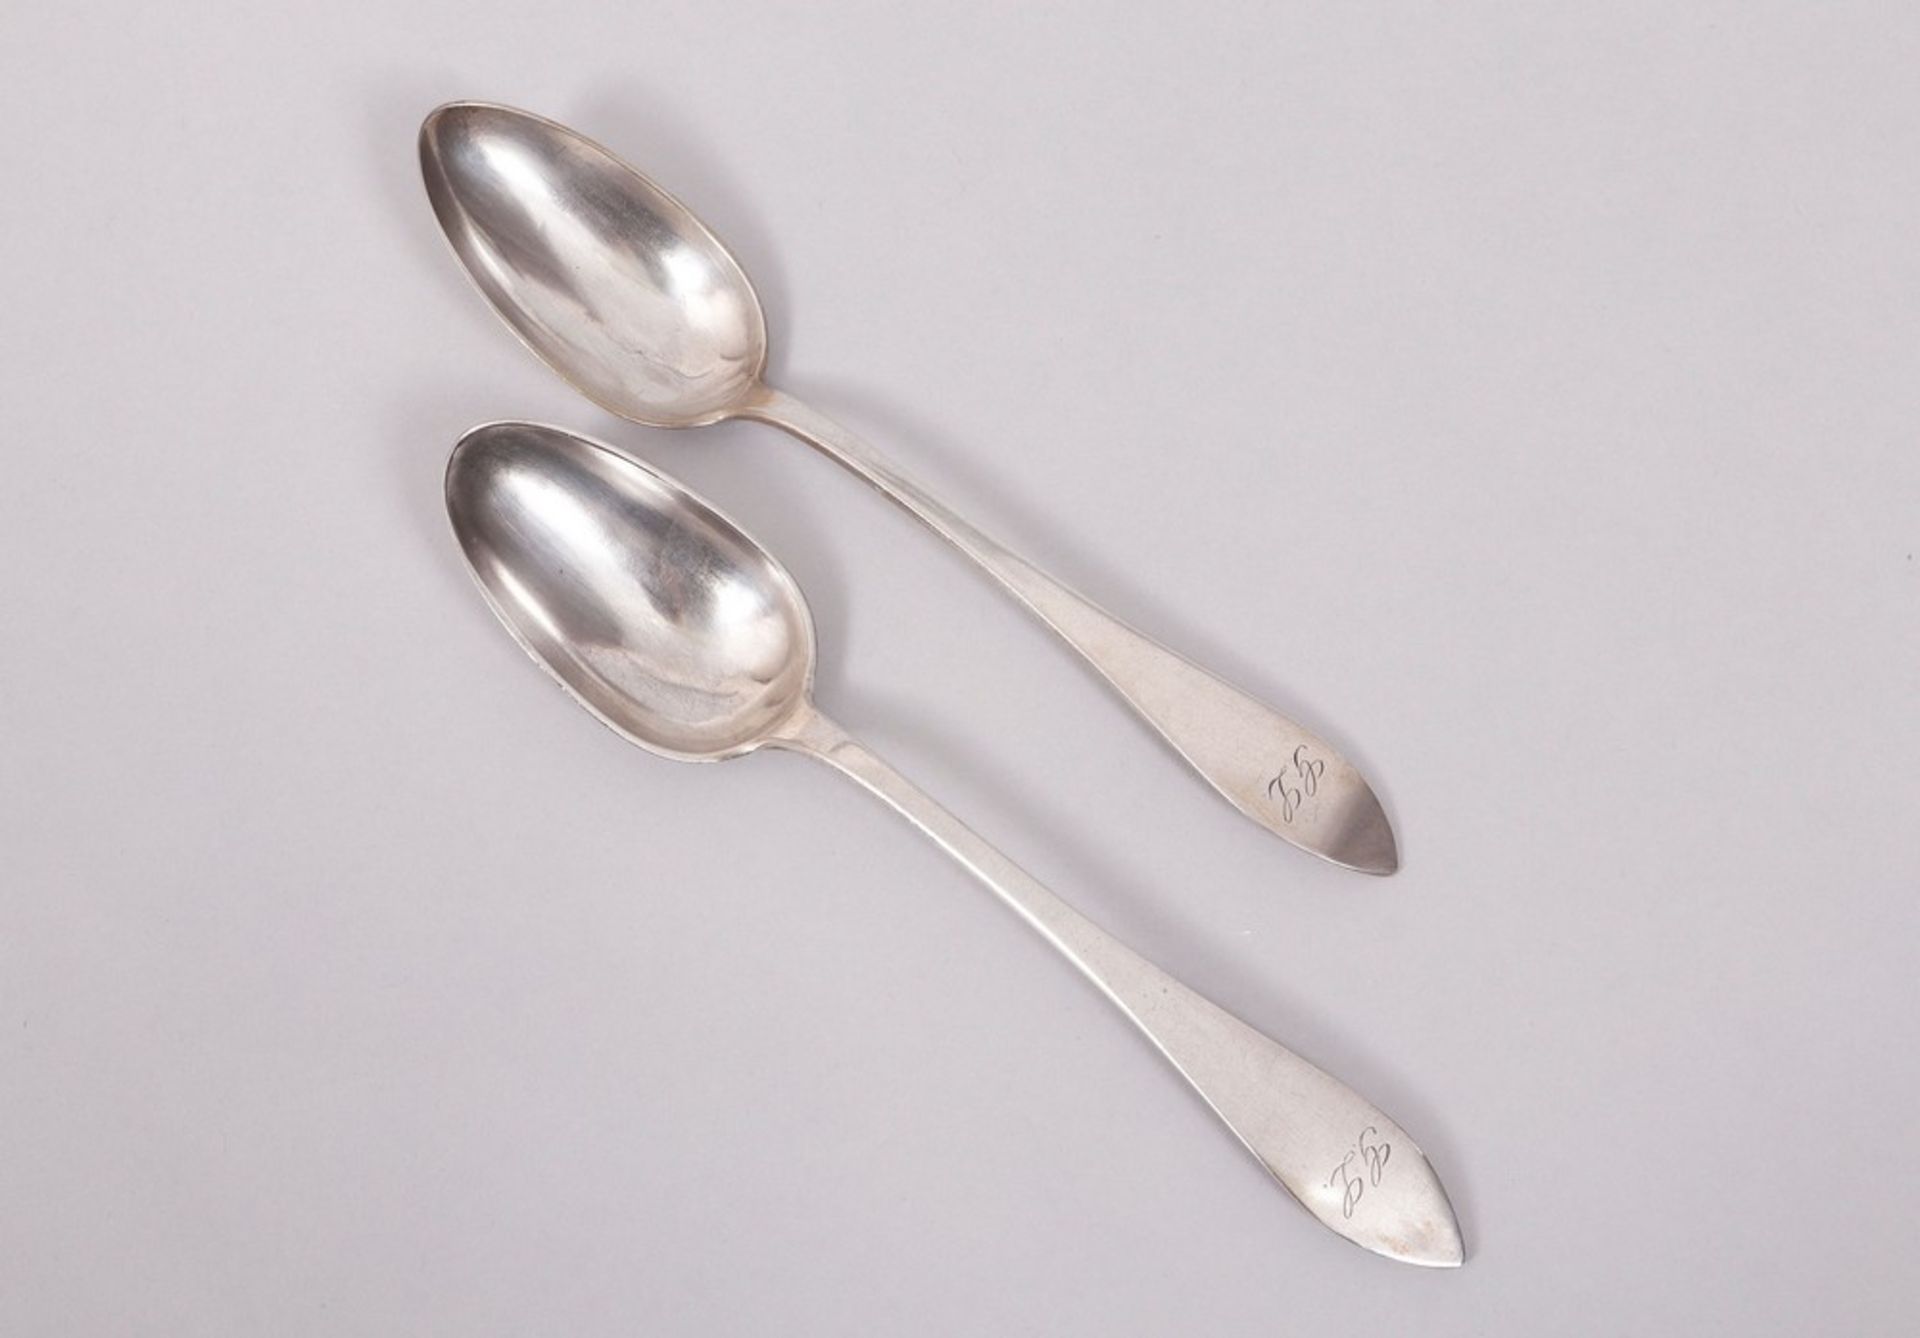 Pair of silver dining spoons, incl. Franz Peter Krumstroh, Glückstadt, early 19th C.